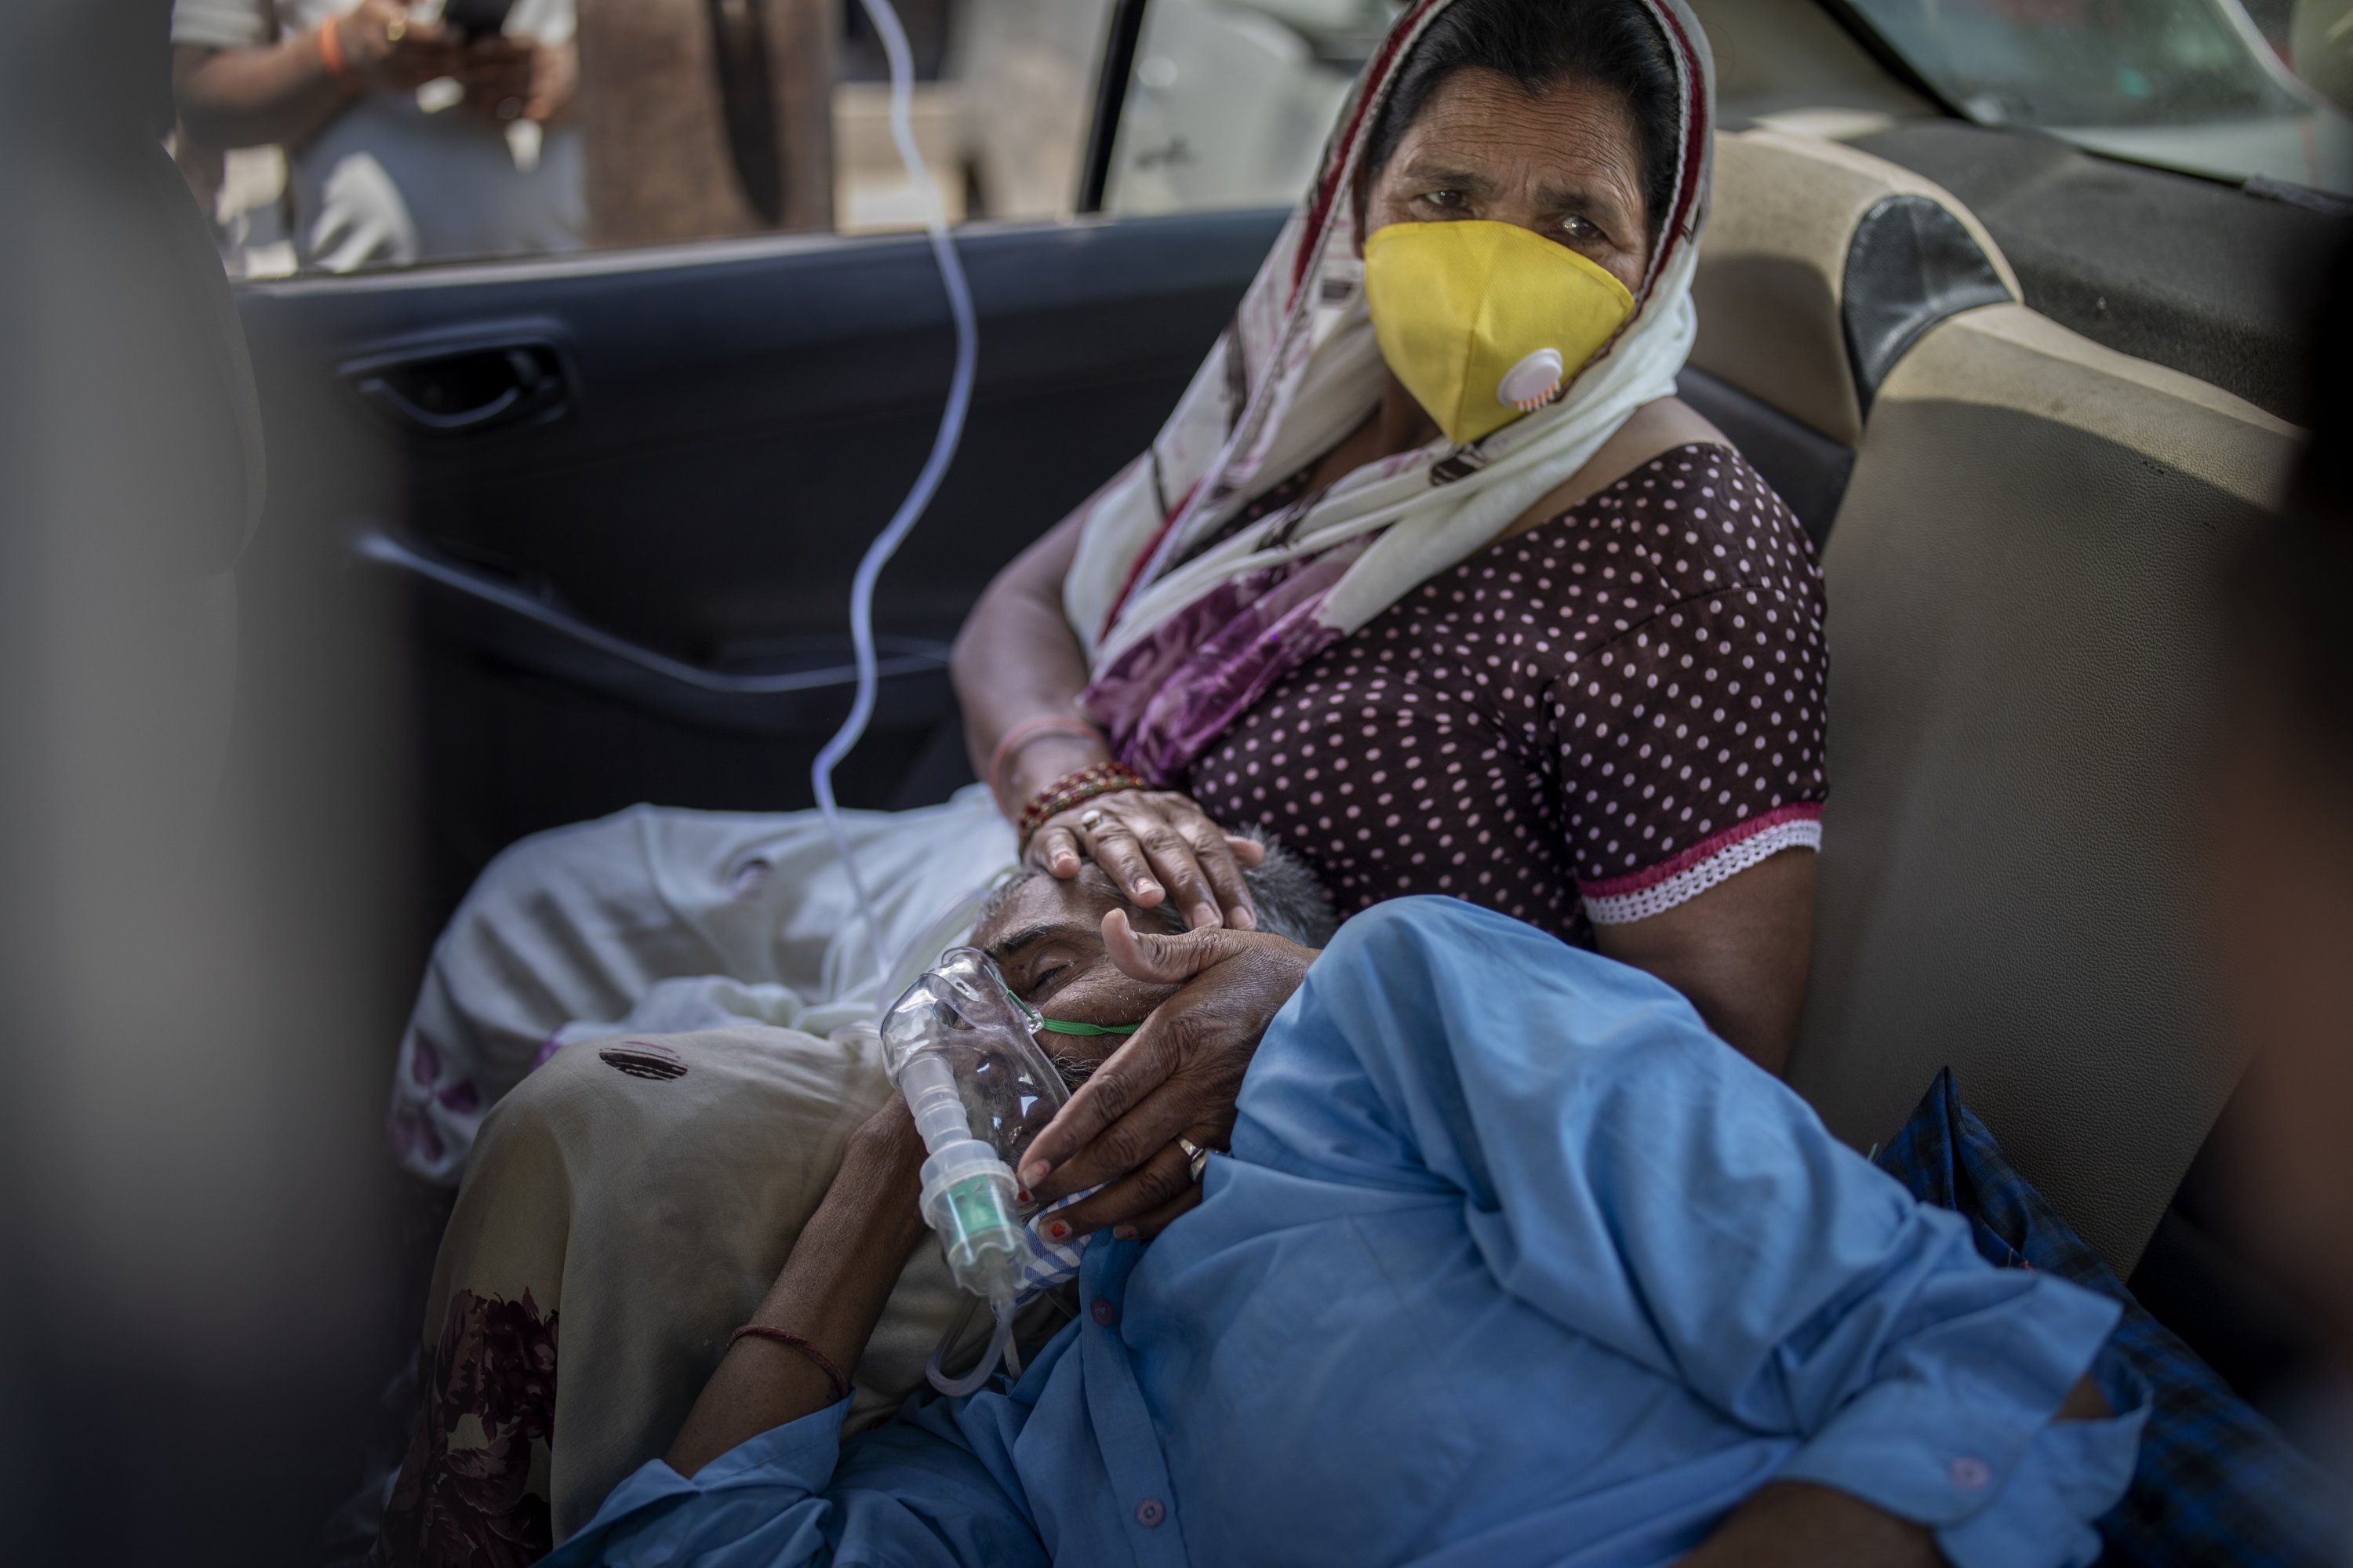 A patient breathes with the help of oxygen provided by a gurdwara, a Sikh place of worship, inside a car in New Delhi, India, April 24, 2021. (AP Photo)